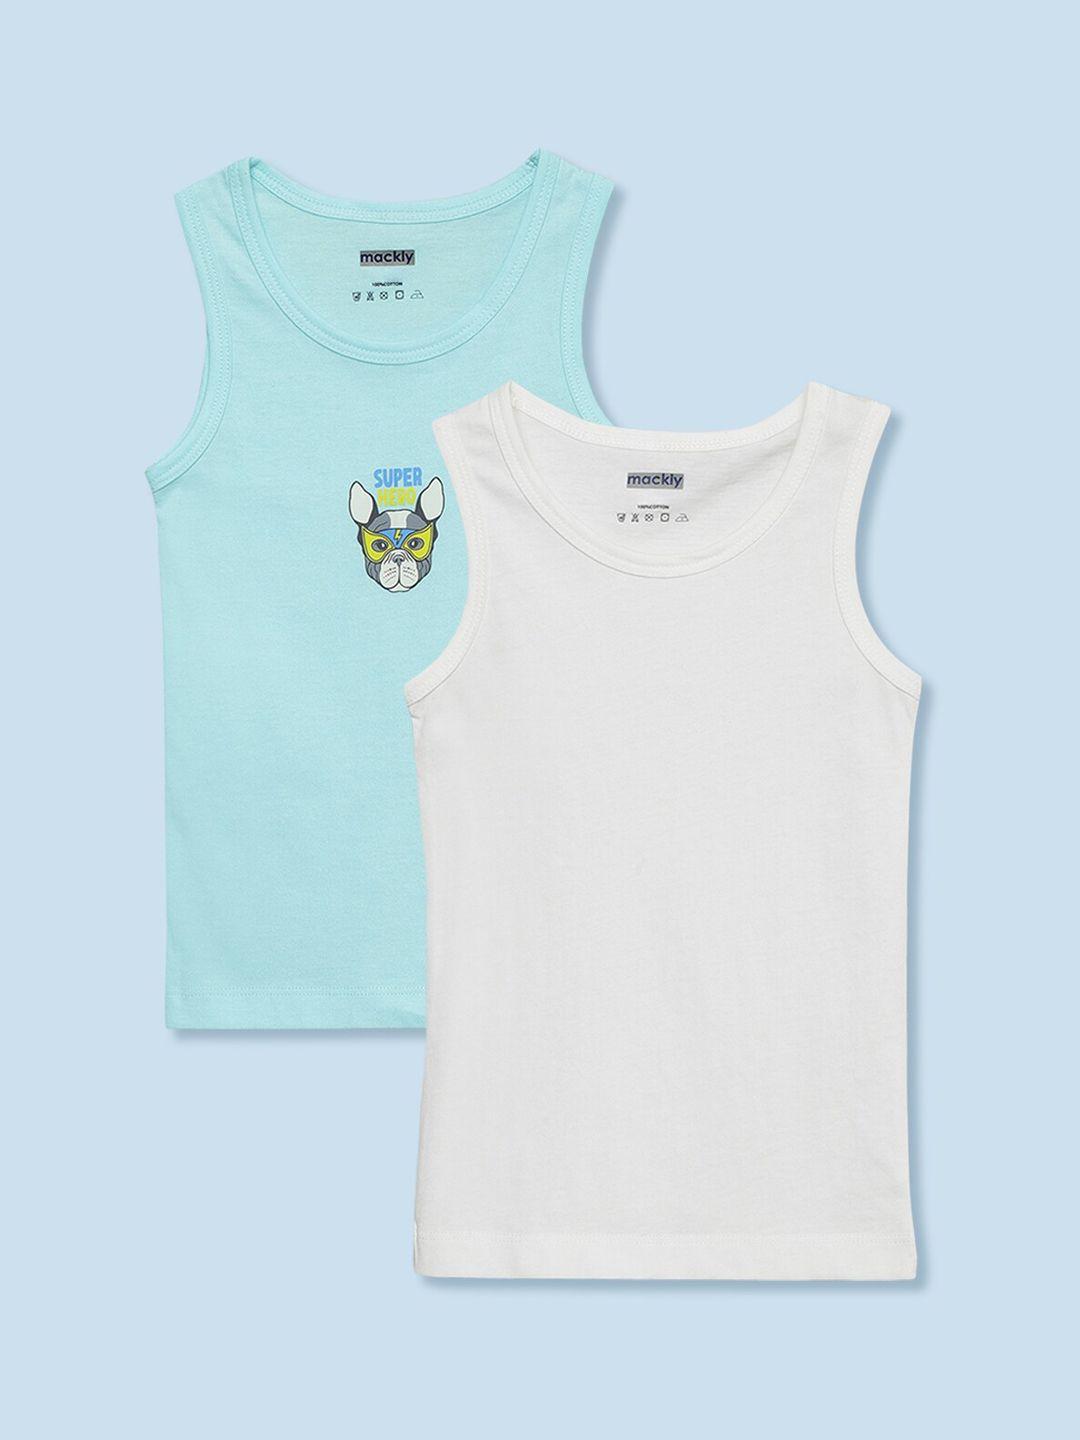 mackly boys pack of 2 pure cotton innerwear vests